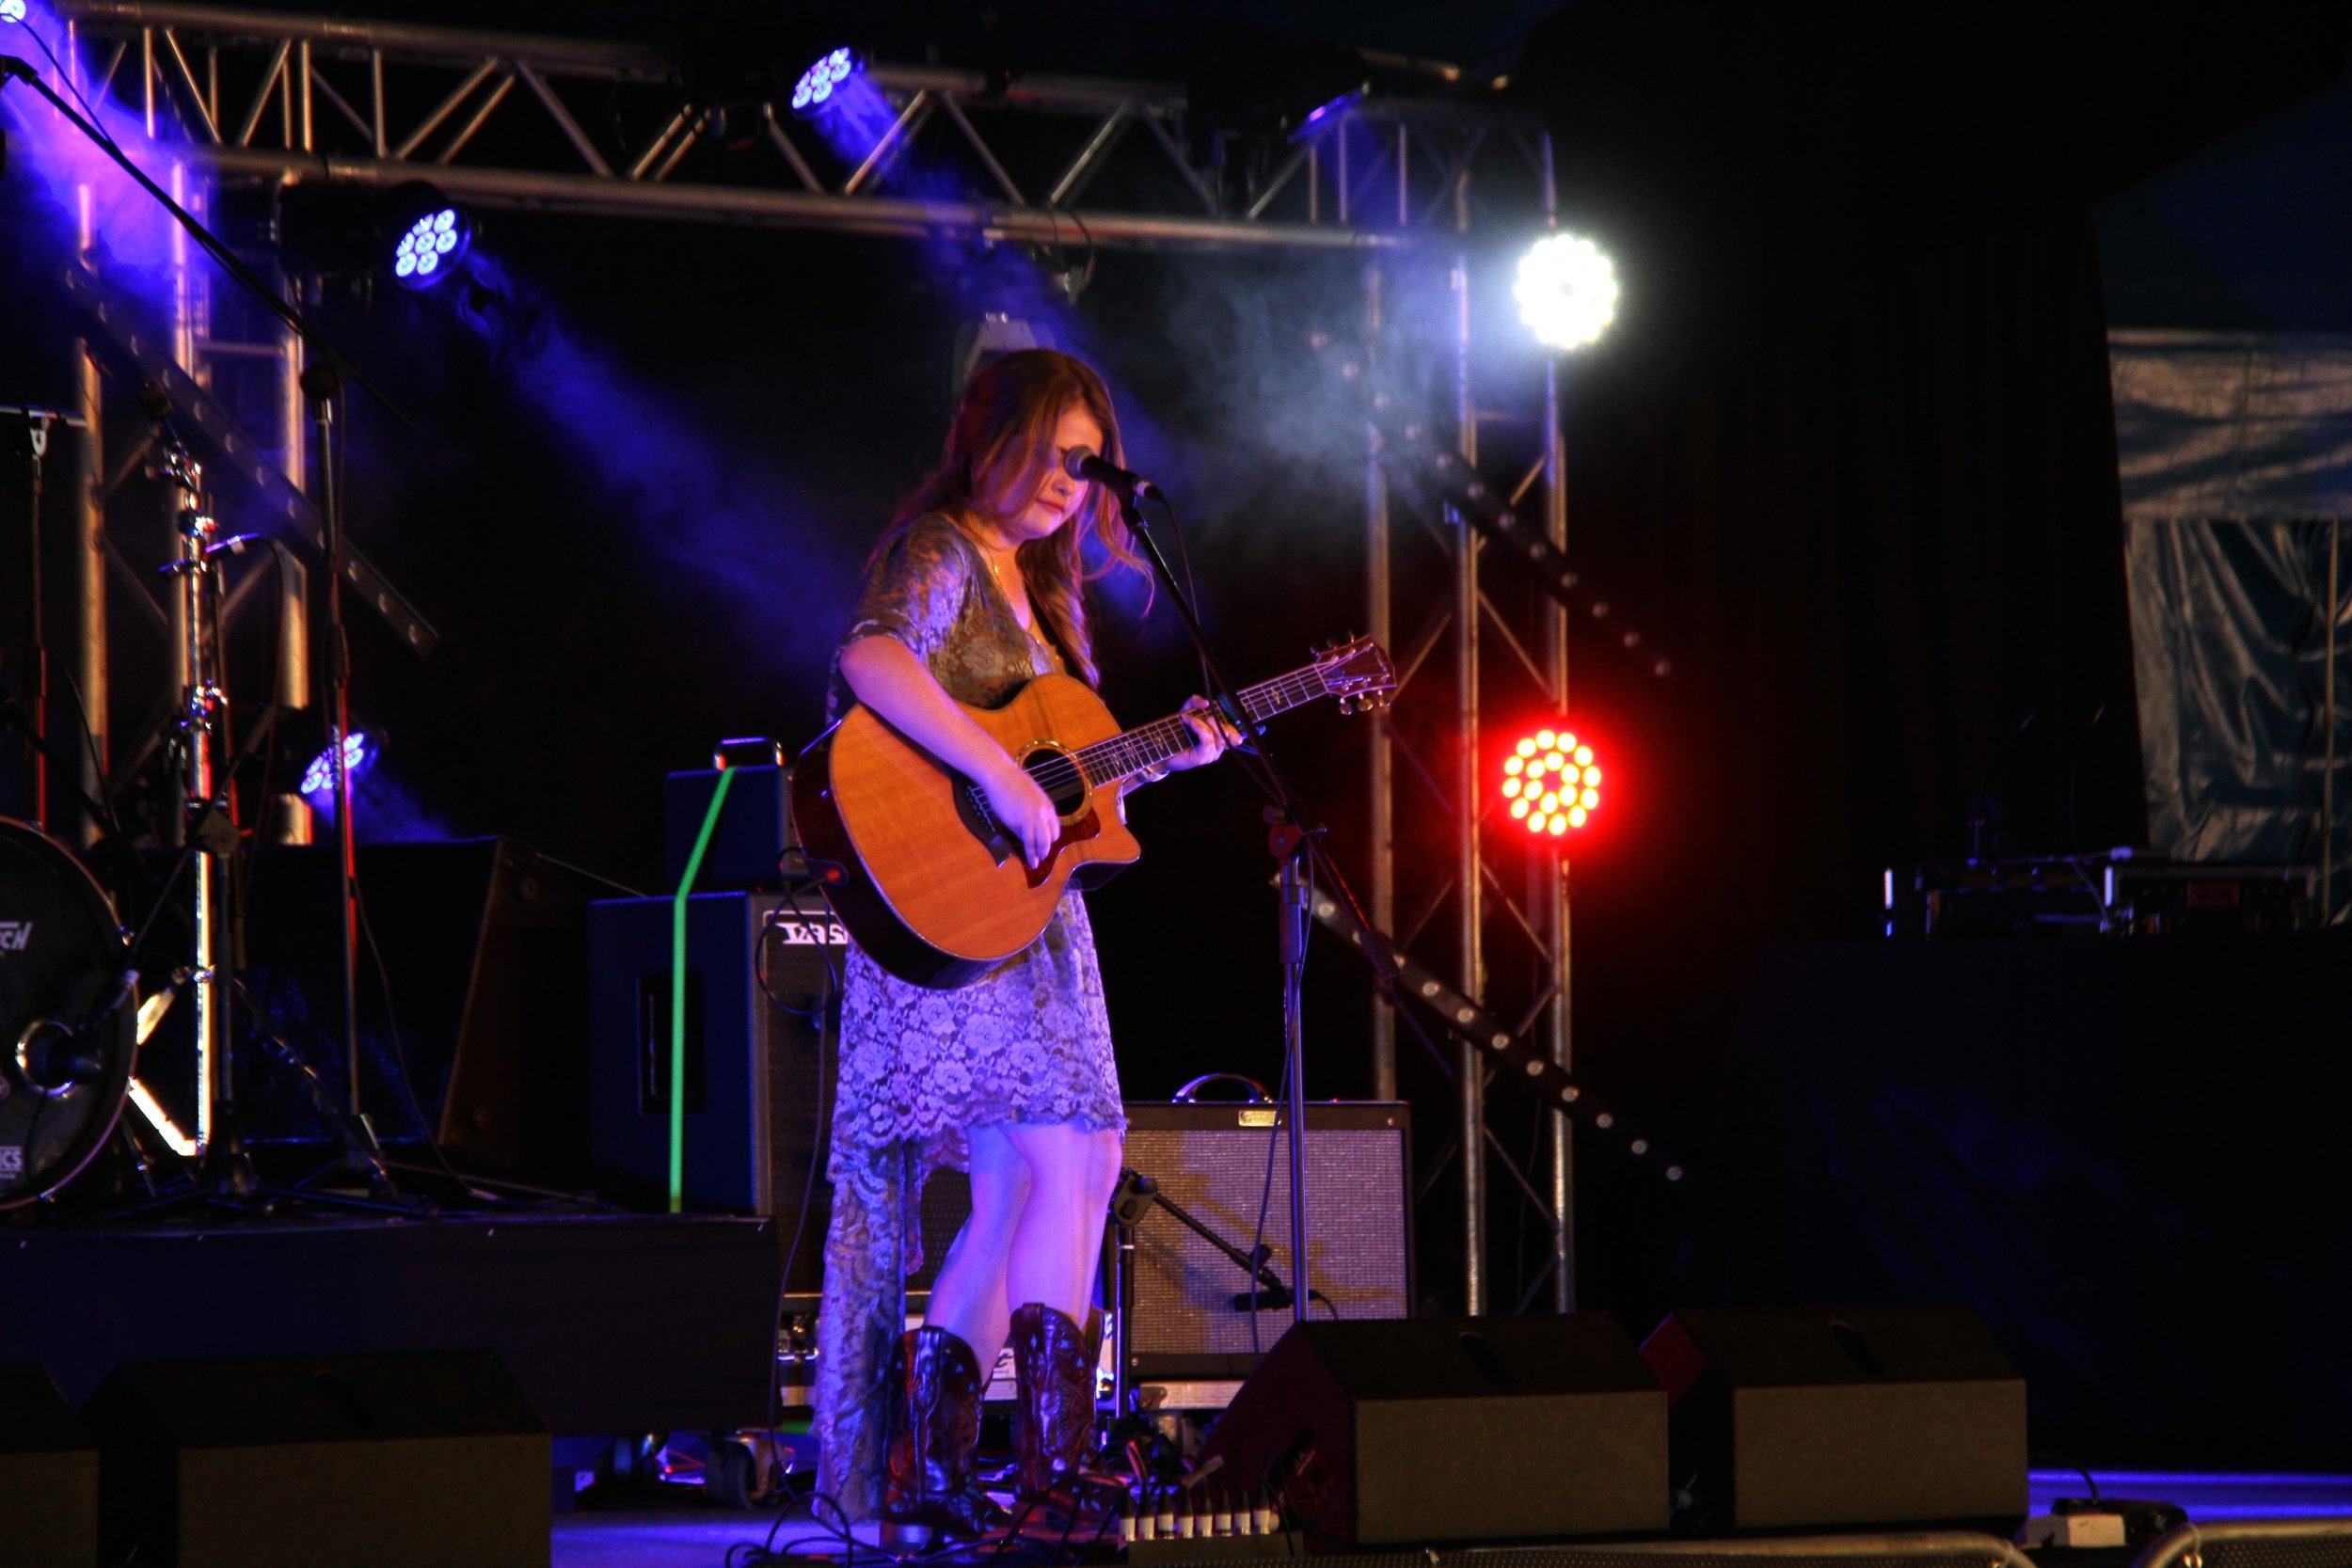  Sami performing at the 2016 Gympie Music Muster  Photography Jaymie Bennee 